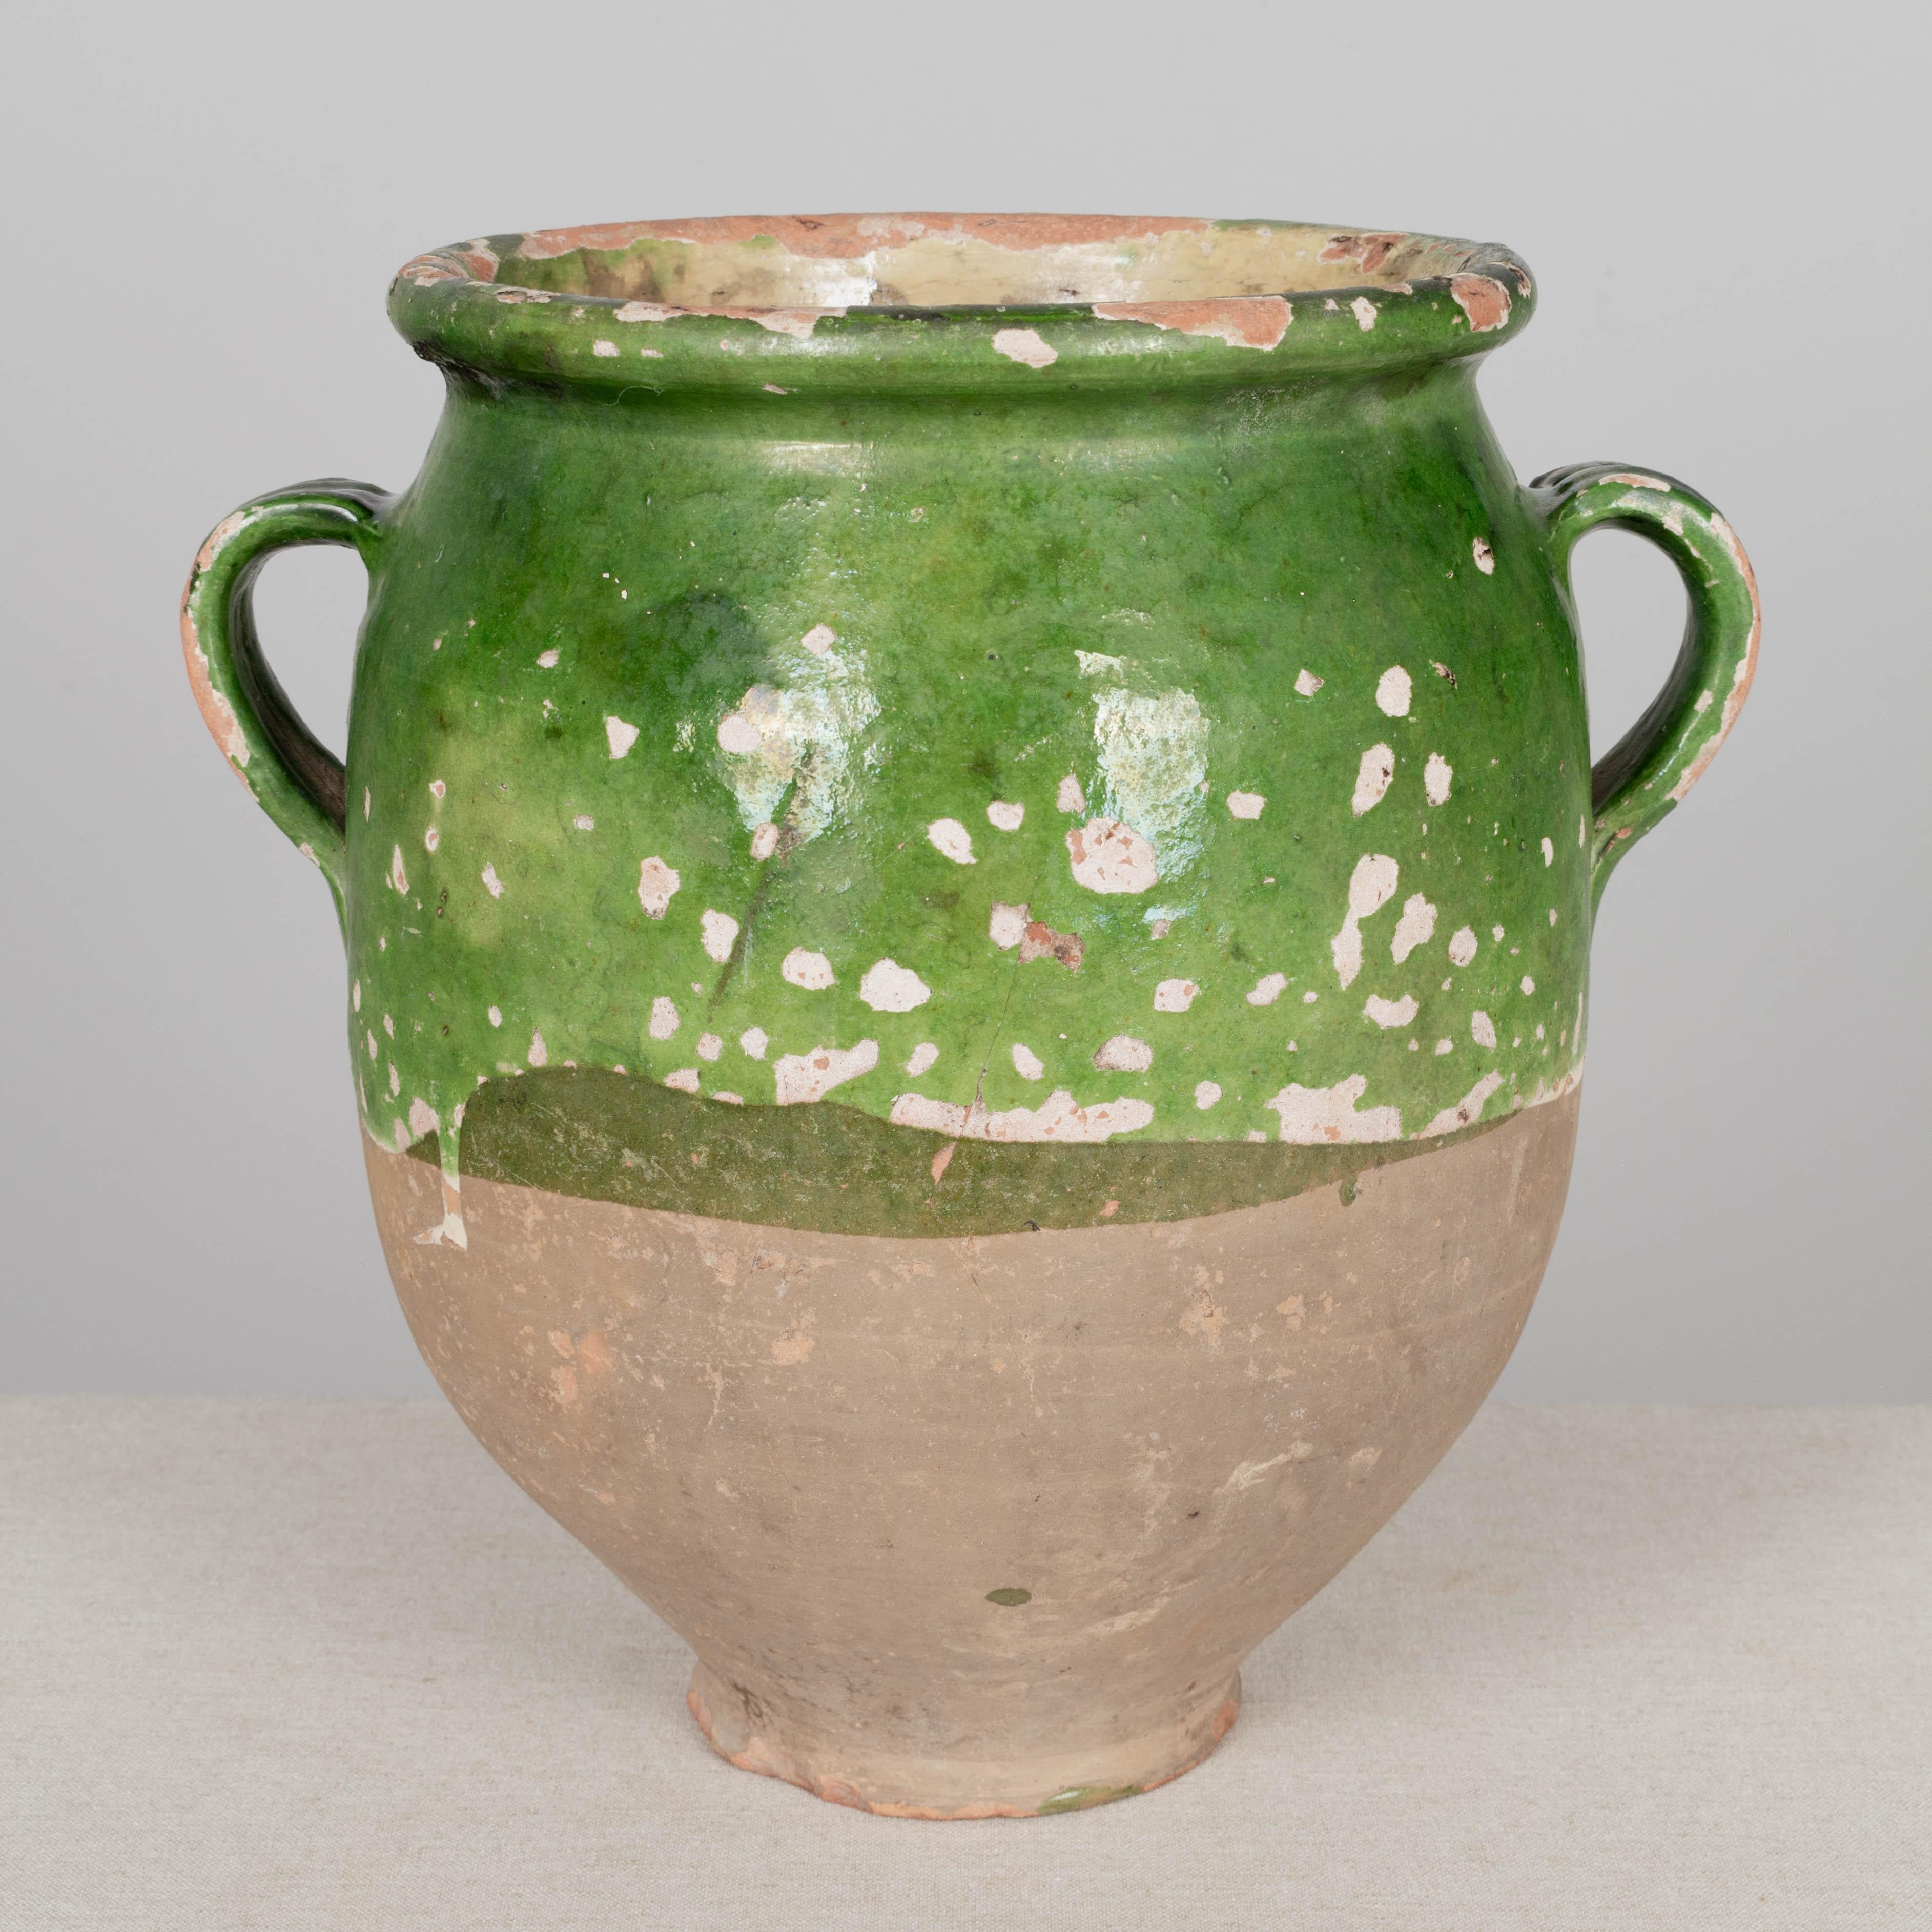 A 19th century French earthenware confit pot with traditional green glaze and pale yellow interior. Some chips and losses to glaze. These ordinary earthenware vessels were once used daily in the French country home and have beautiful rustic glazes